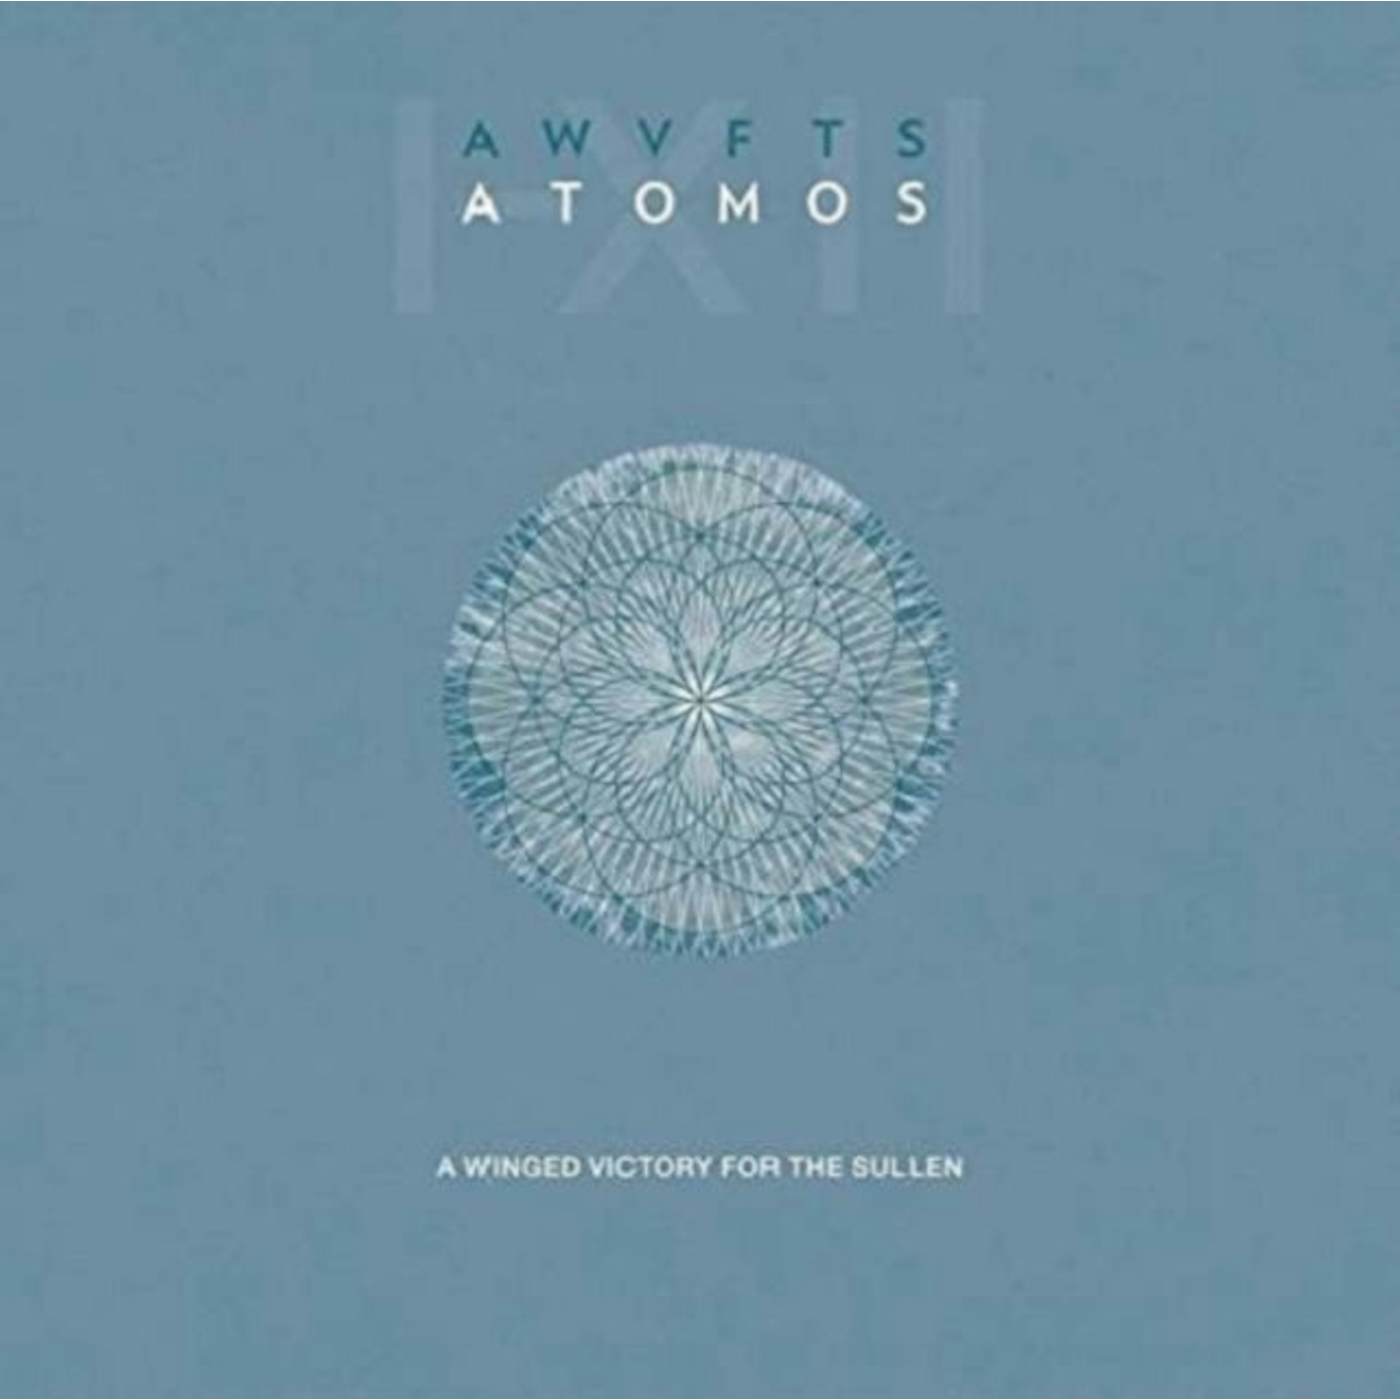 A Winged Victory For The Sullen LP Vinyl Record - Atomos